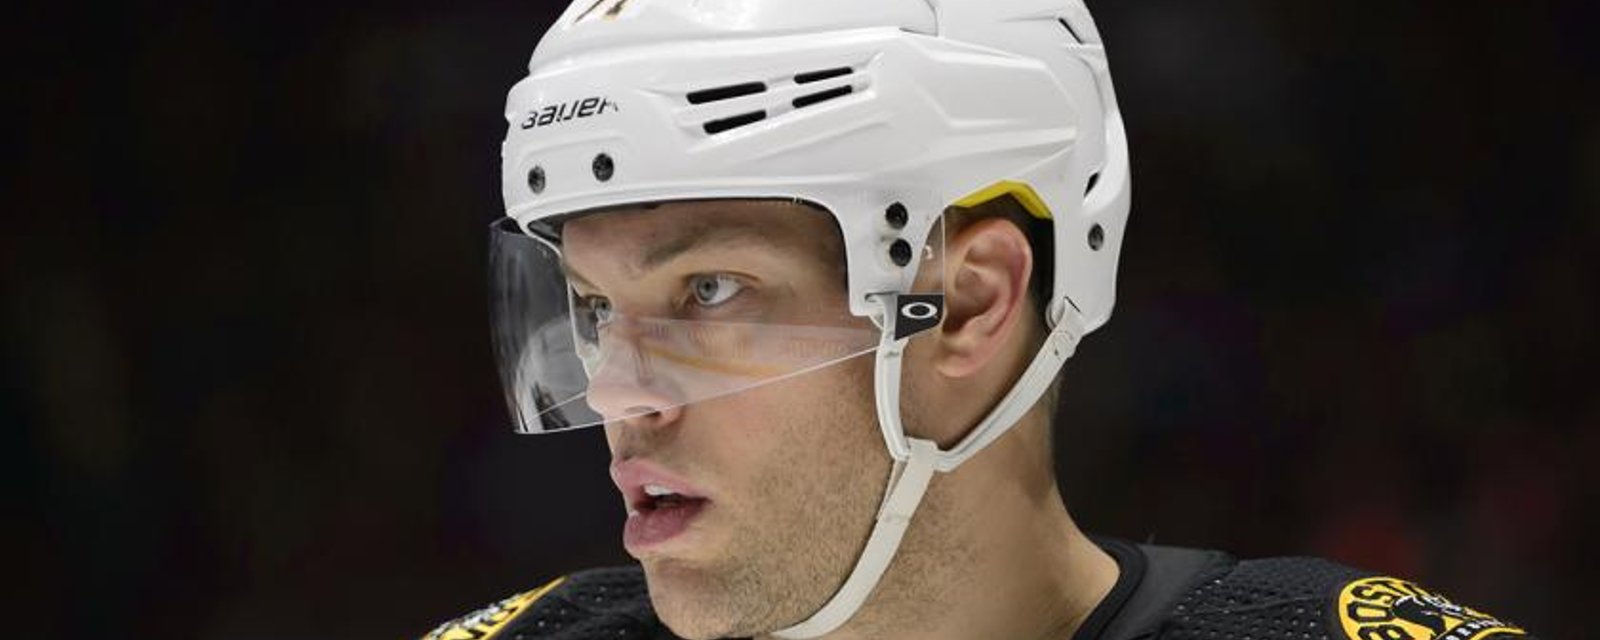 Crucial update released on Bruins' Taylor Hall 